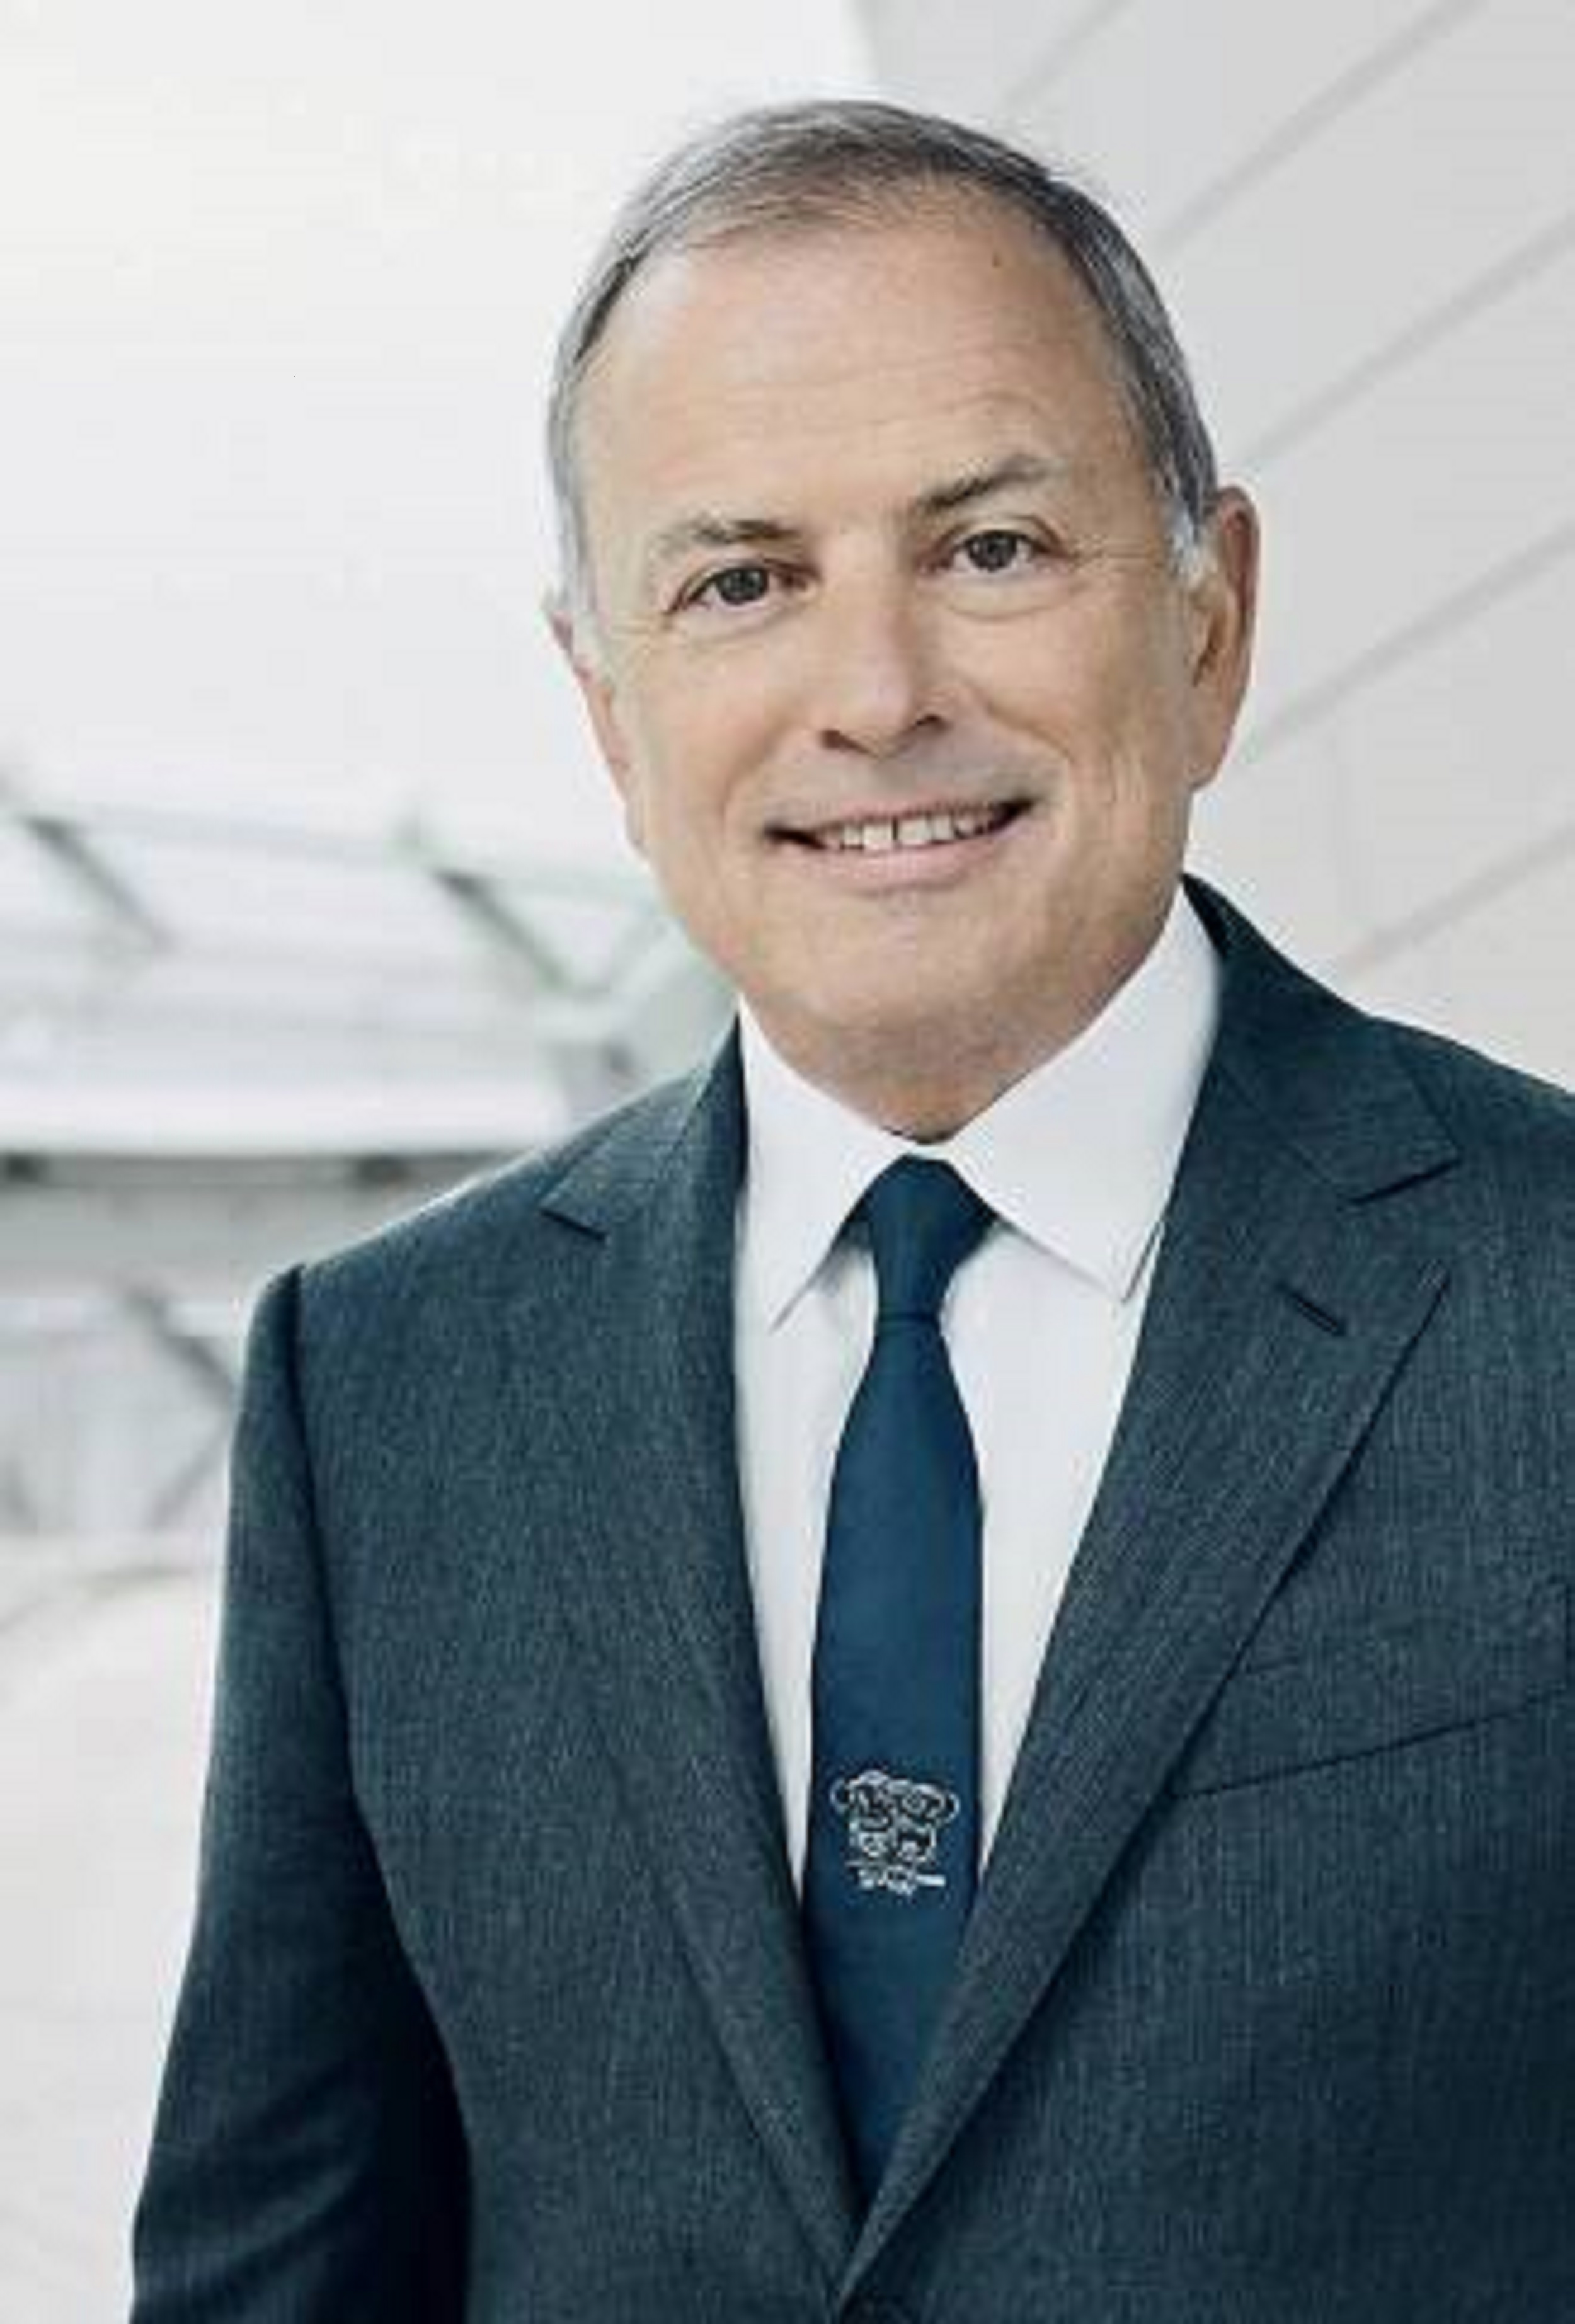 Major strategic appointments at LVMH - Luxury Tribune